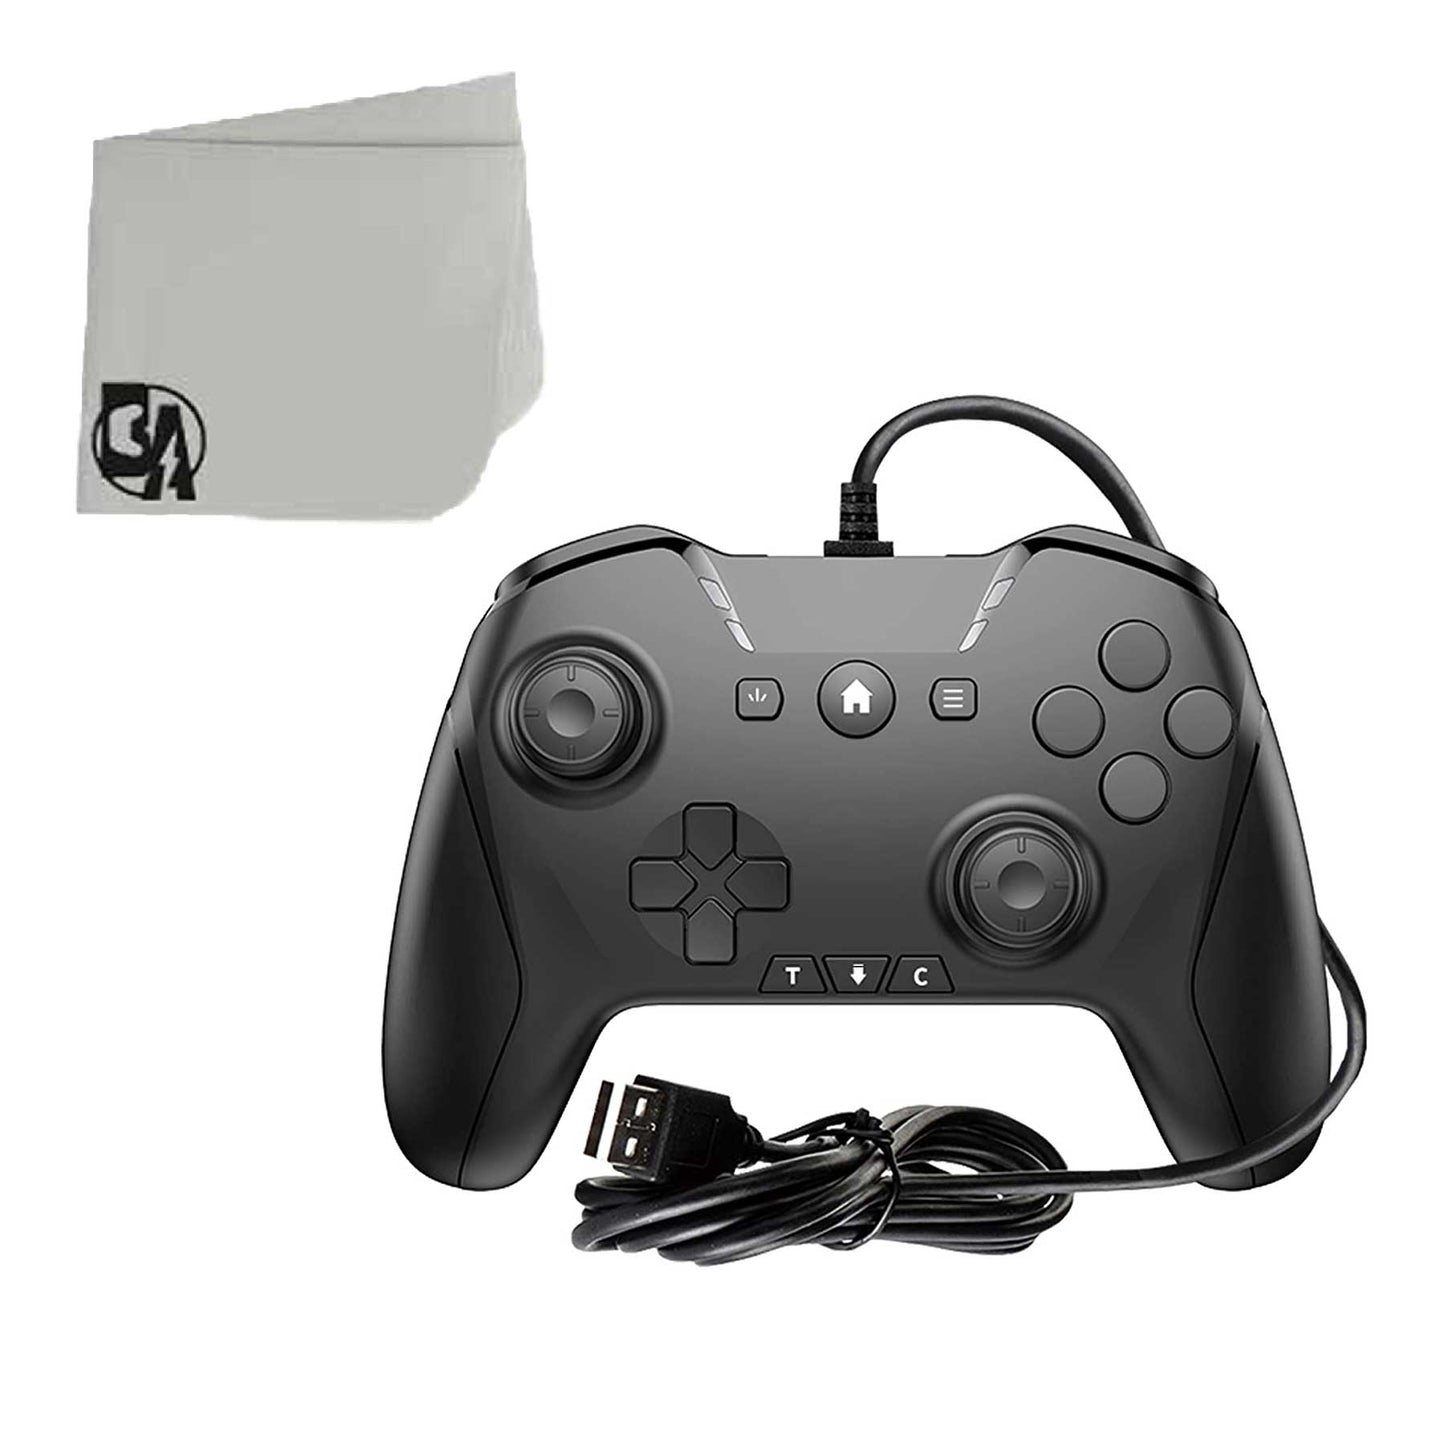 Wired PS4 Game Controller for Playstation 4 with Long Cable BOLT AXTION